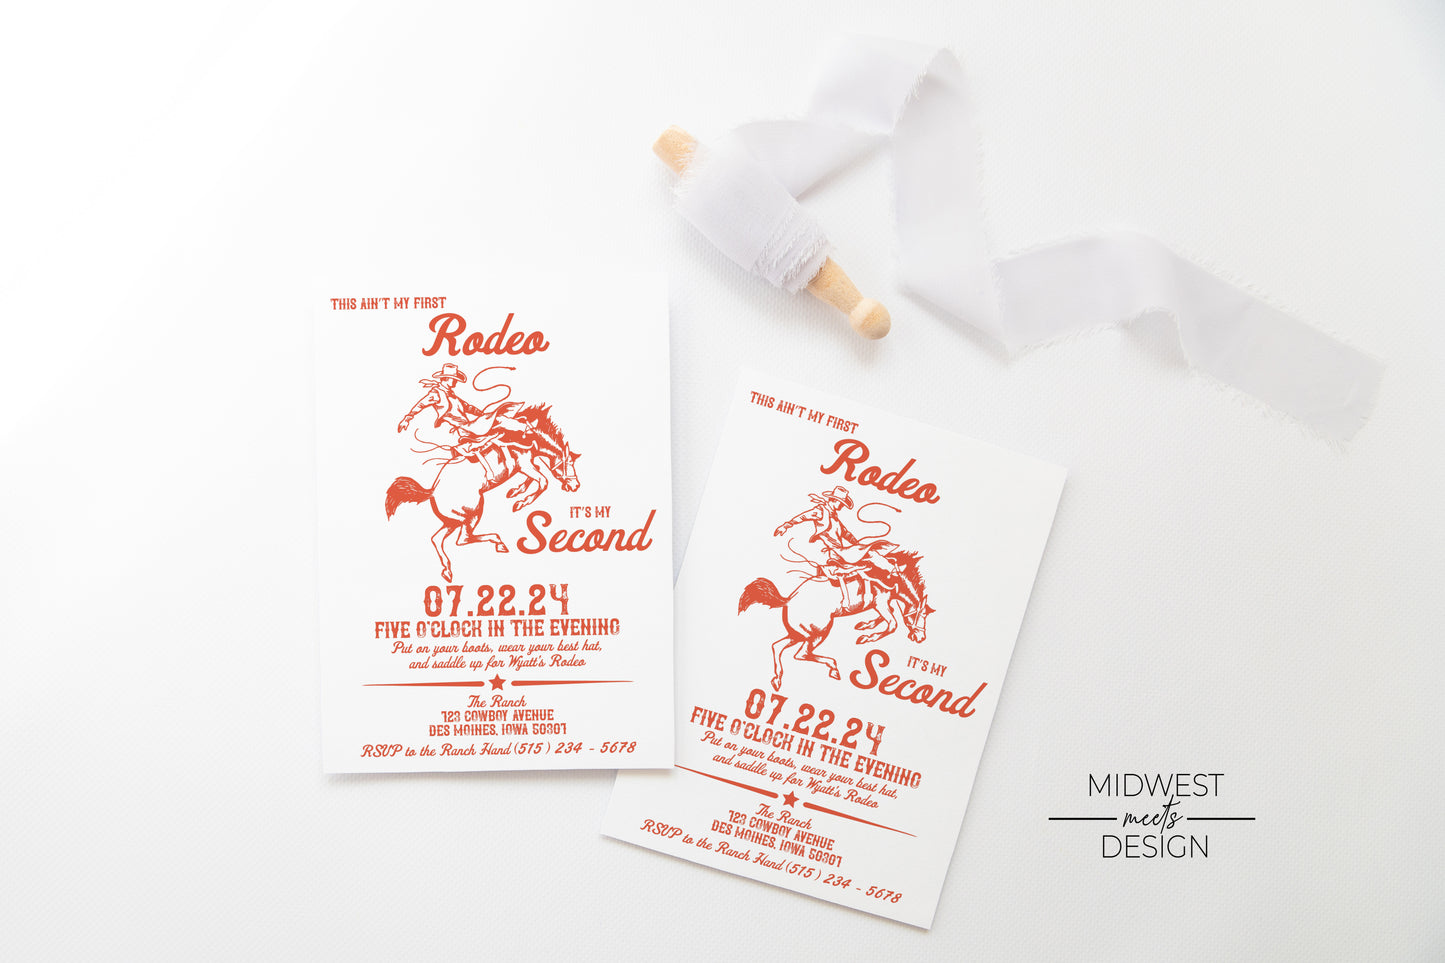 Ain't My First Rodeo Party Invites - Digital/Print